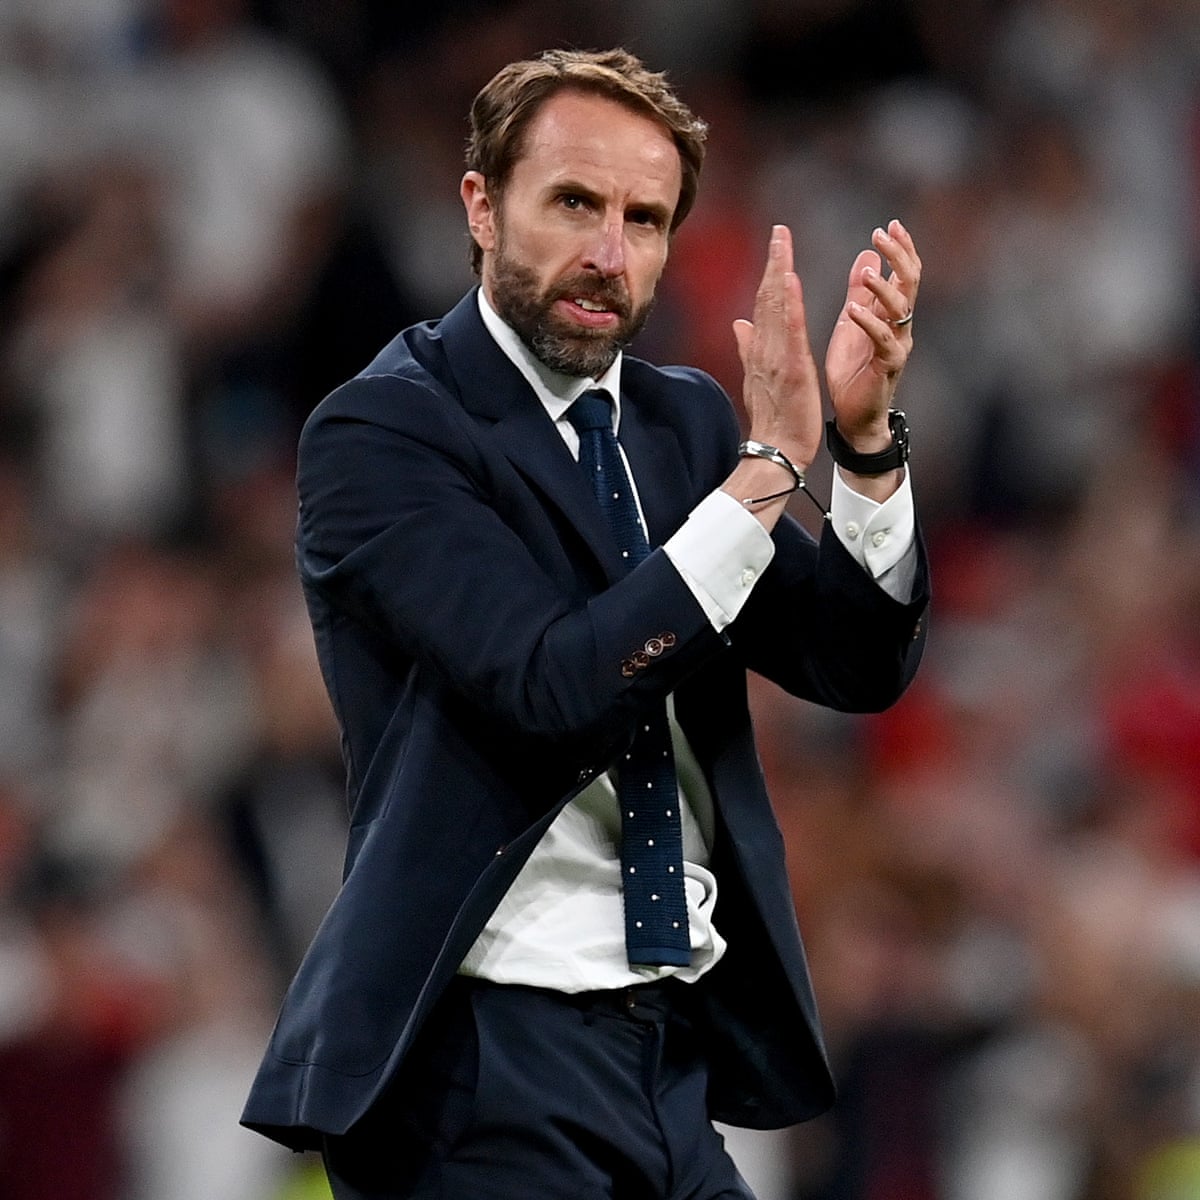 Gareth Southgate's special qualities can be lost amid political squabbles | Gareth Southgate | The Guardian